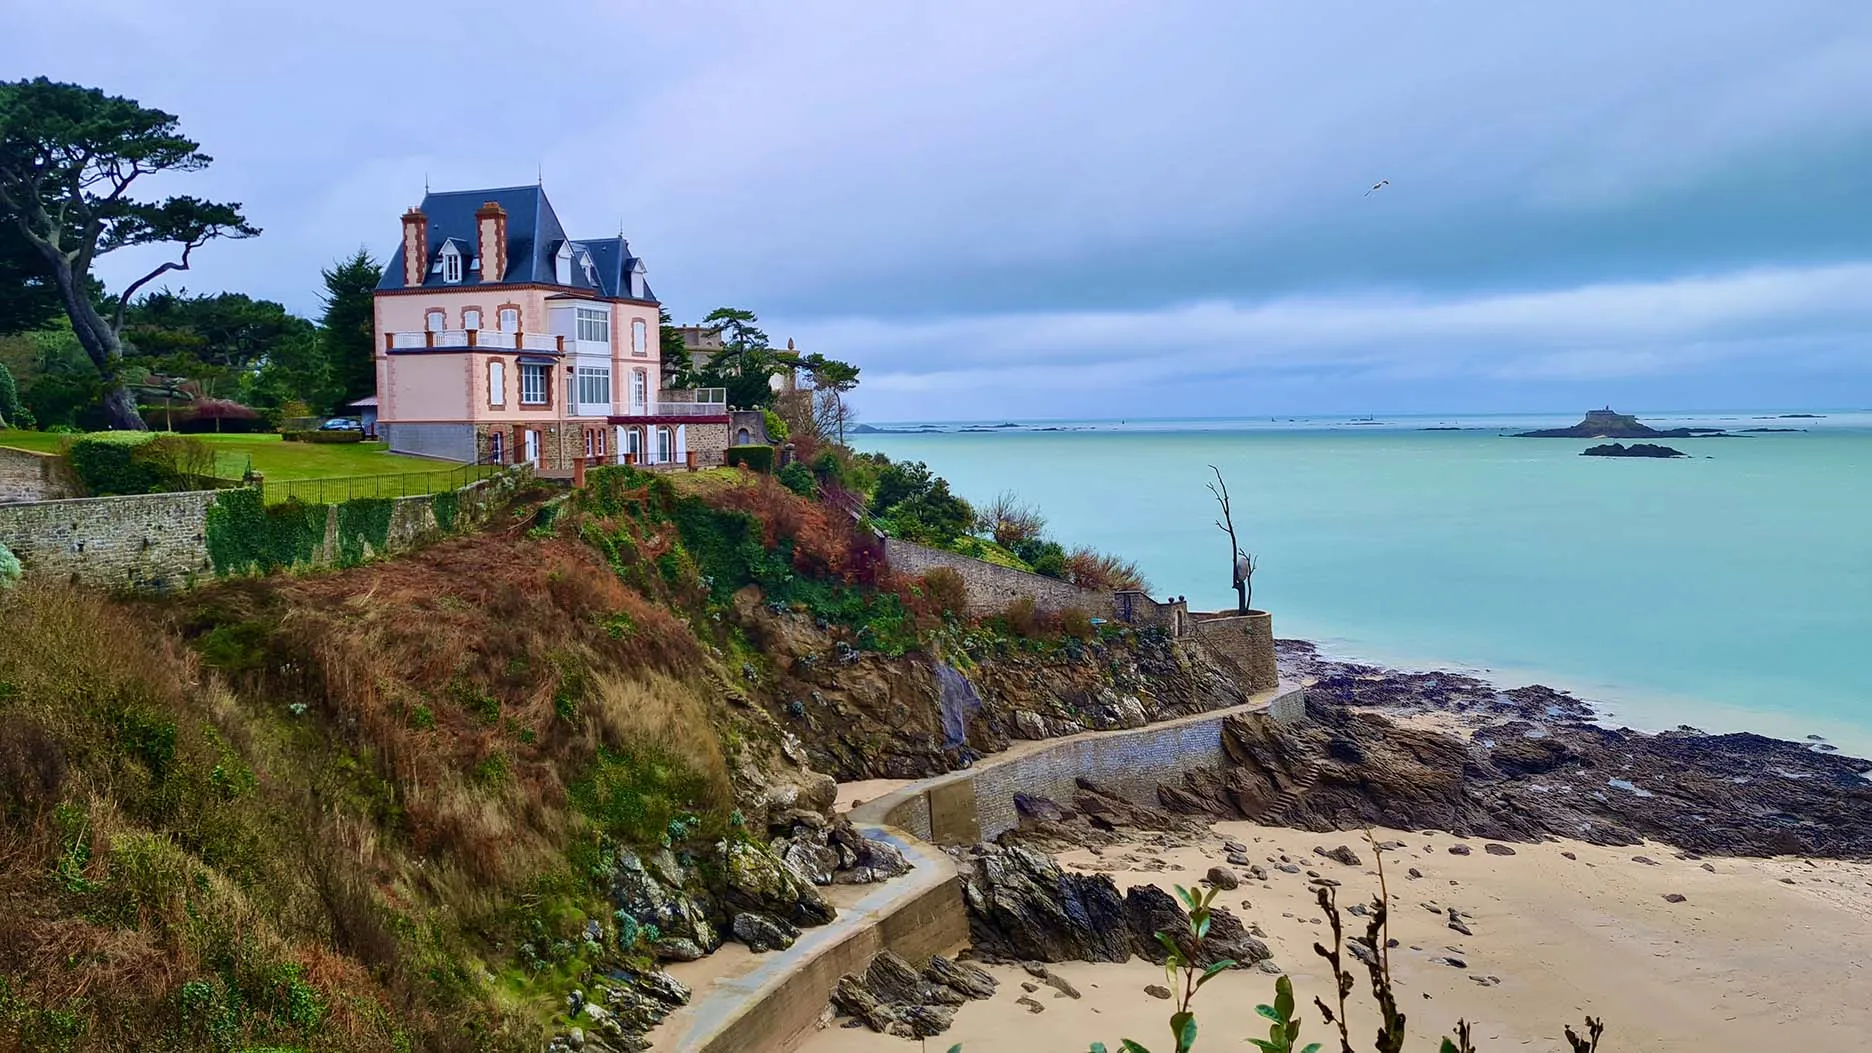 What to do in Dinard in France?